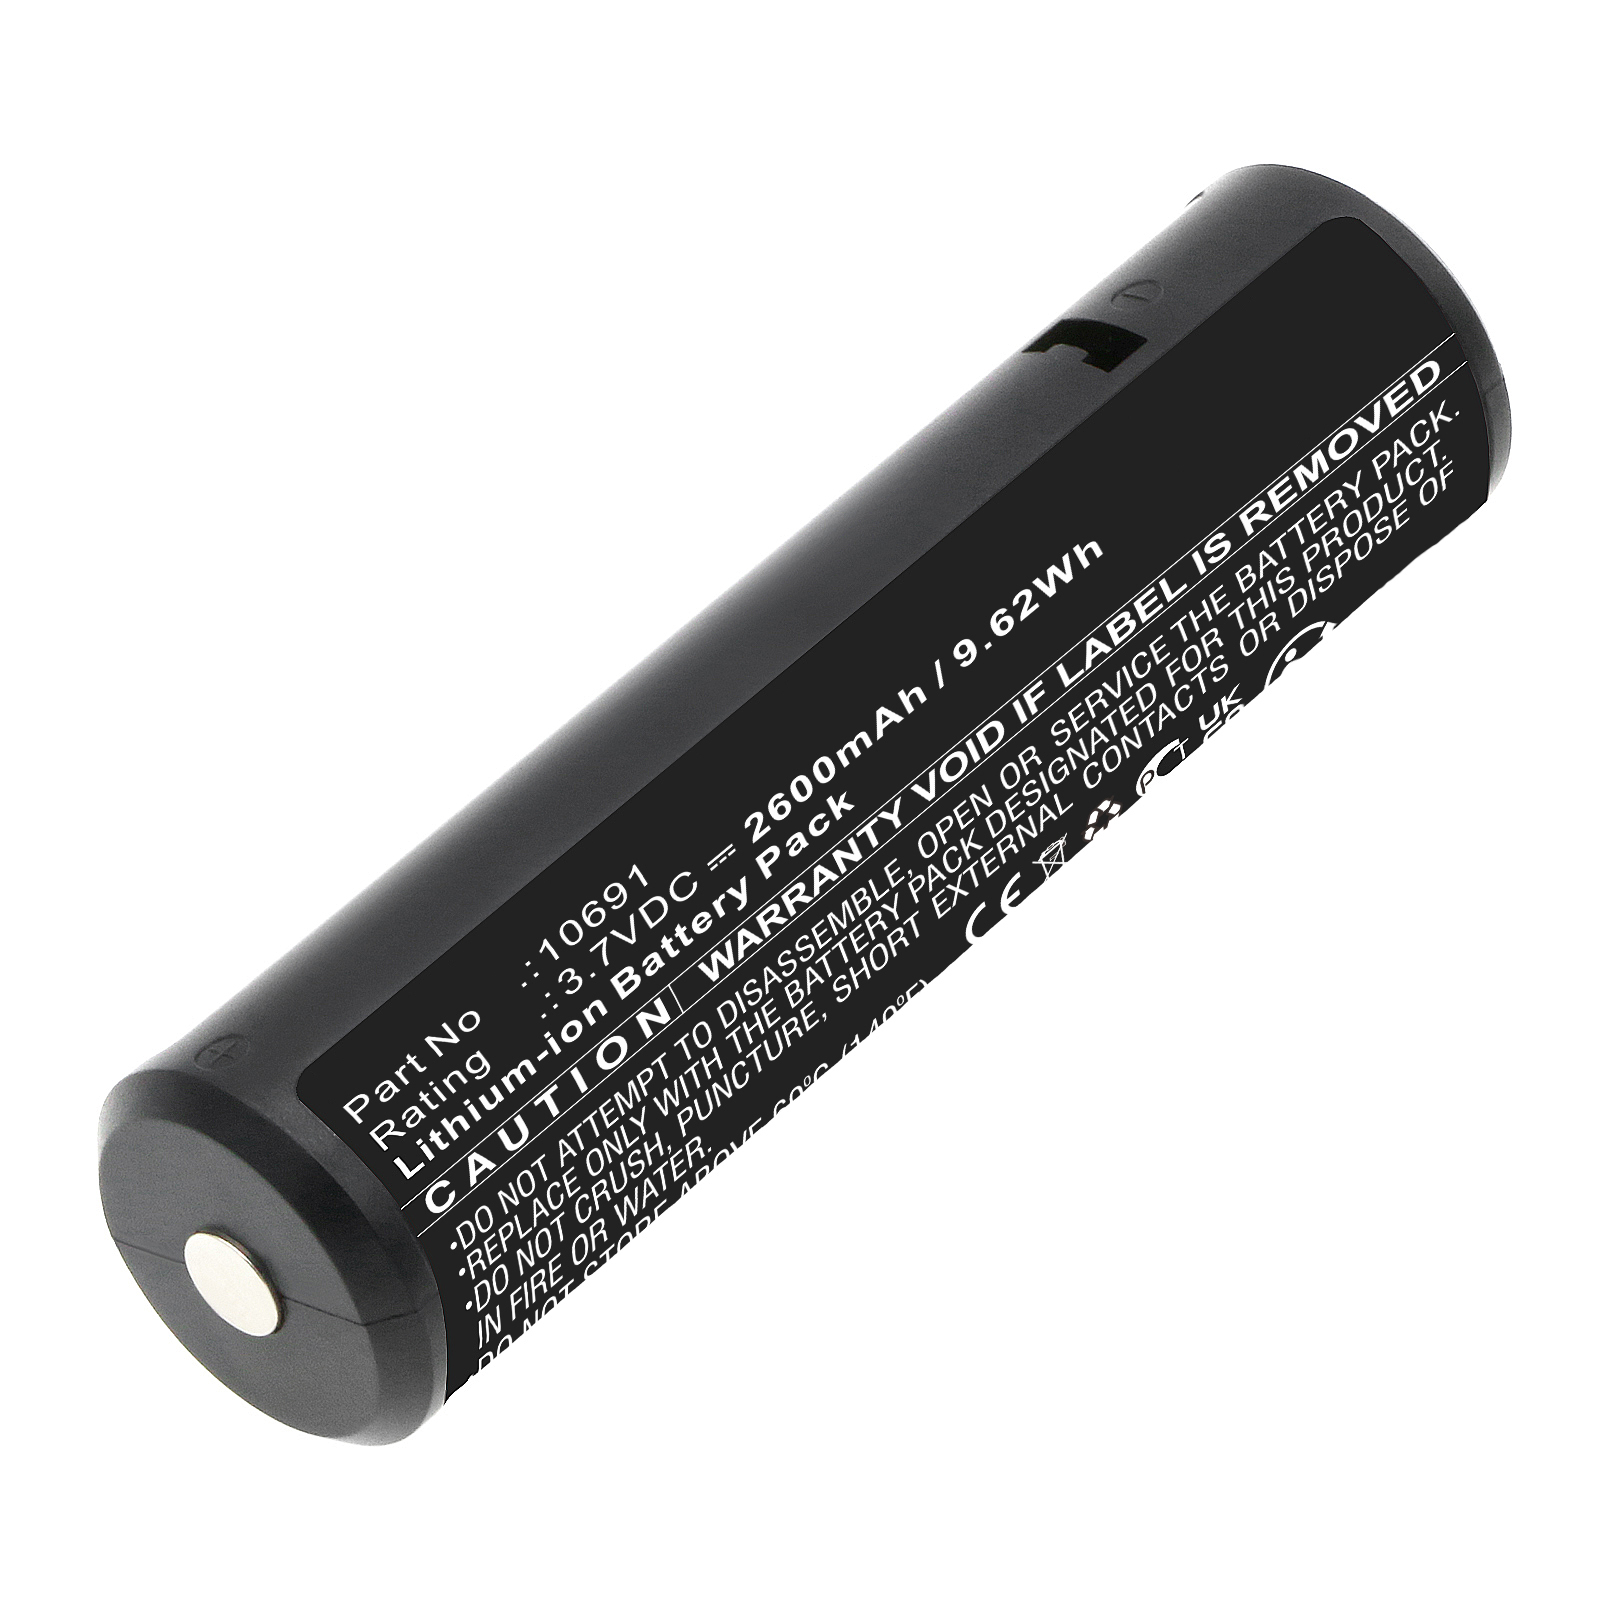 Synergy Digital Medical Battery, Compatible with Riester 10691 Medical Battery (Li-Ion, 3.7V, 2600mAh)